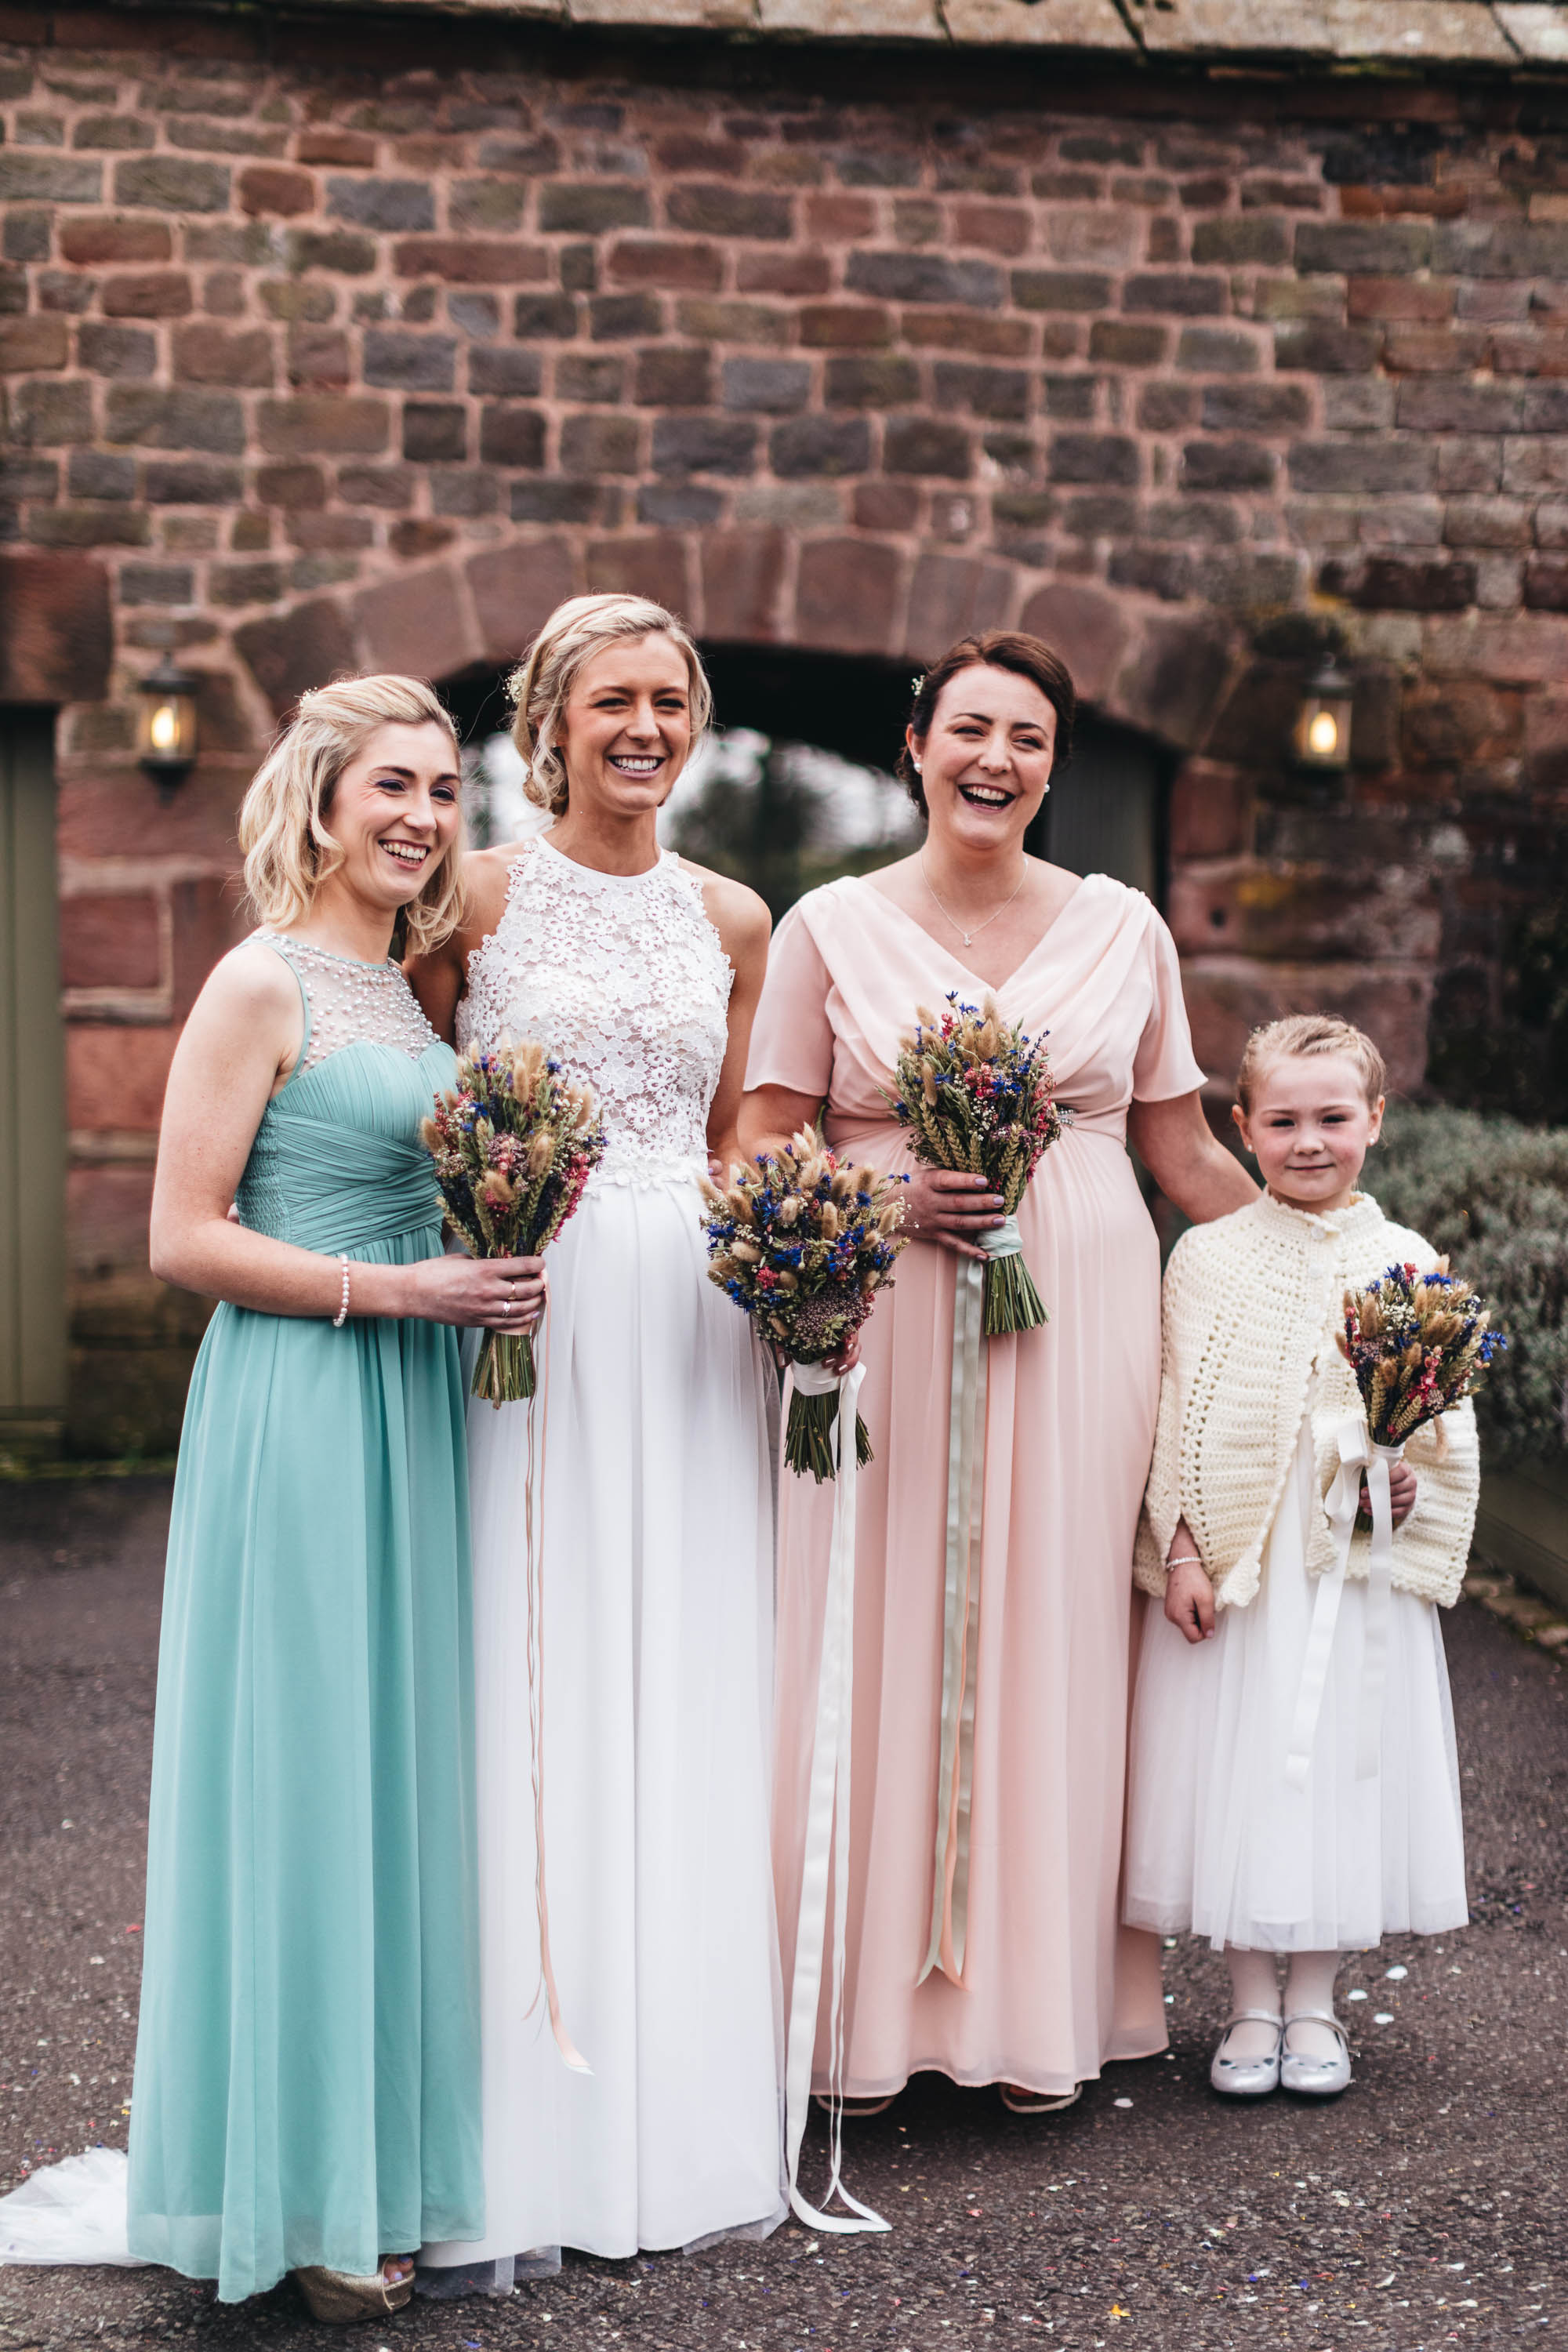 Bridal party and flower girl pose for photo outside The Ashes Wedding Venue